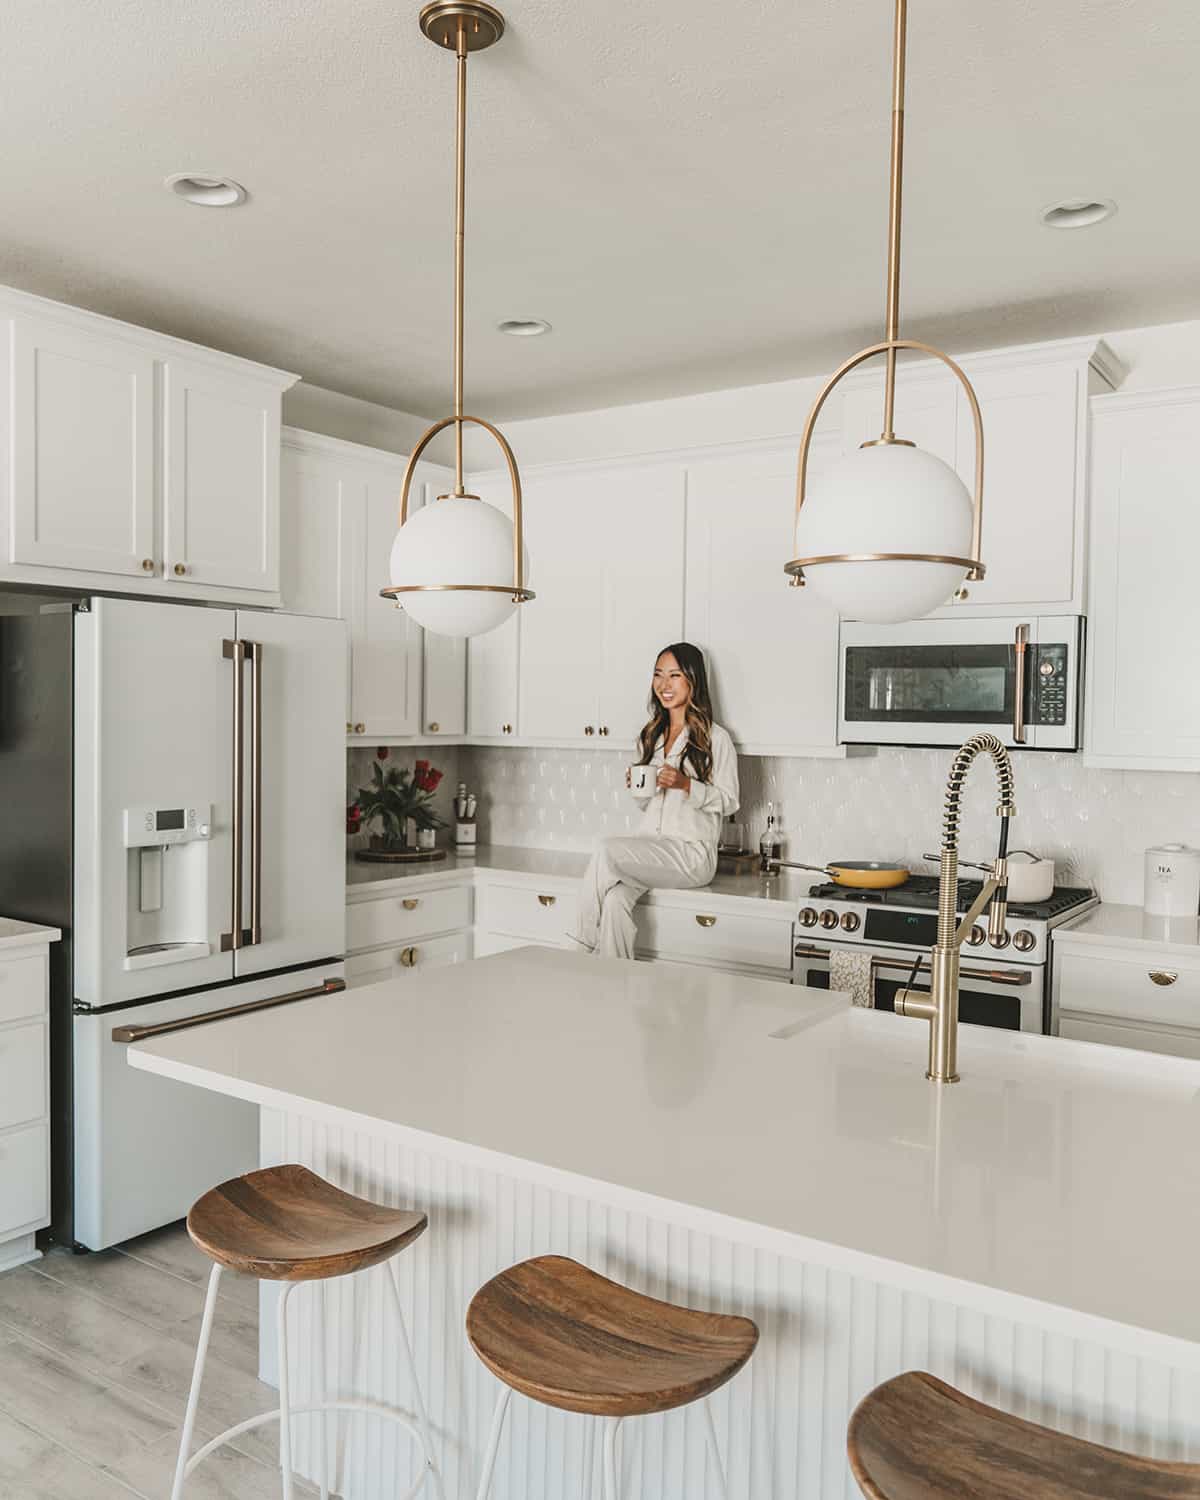 All-white kitchen design with white cabinets and white appliances | GE Cafe appliances